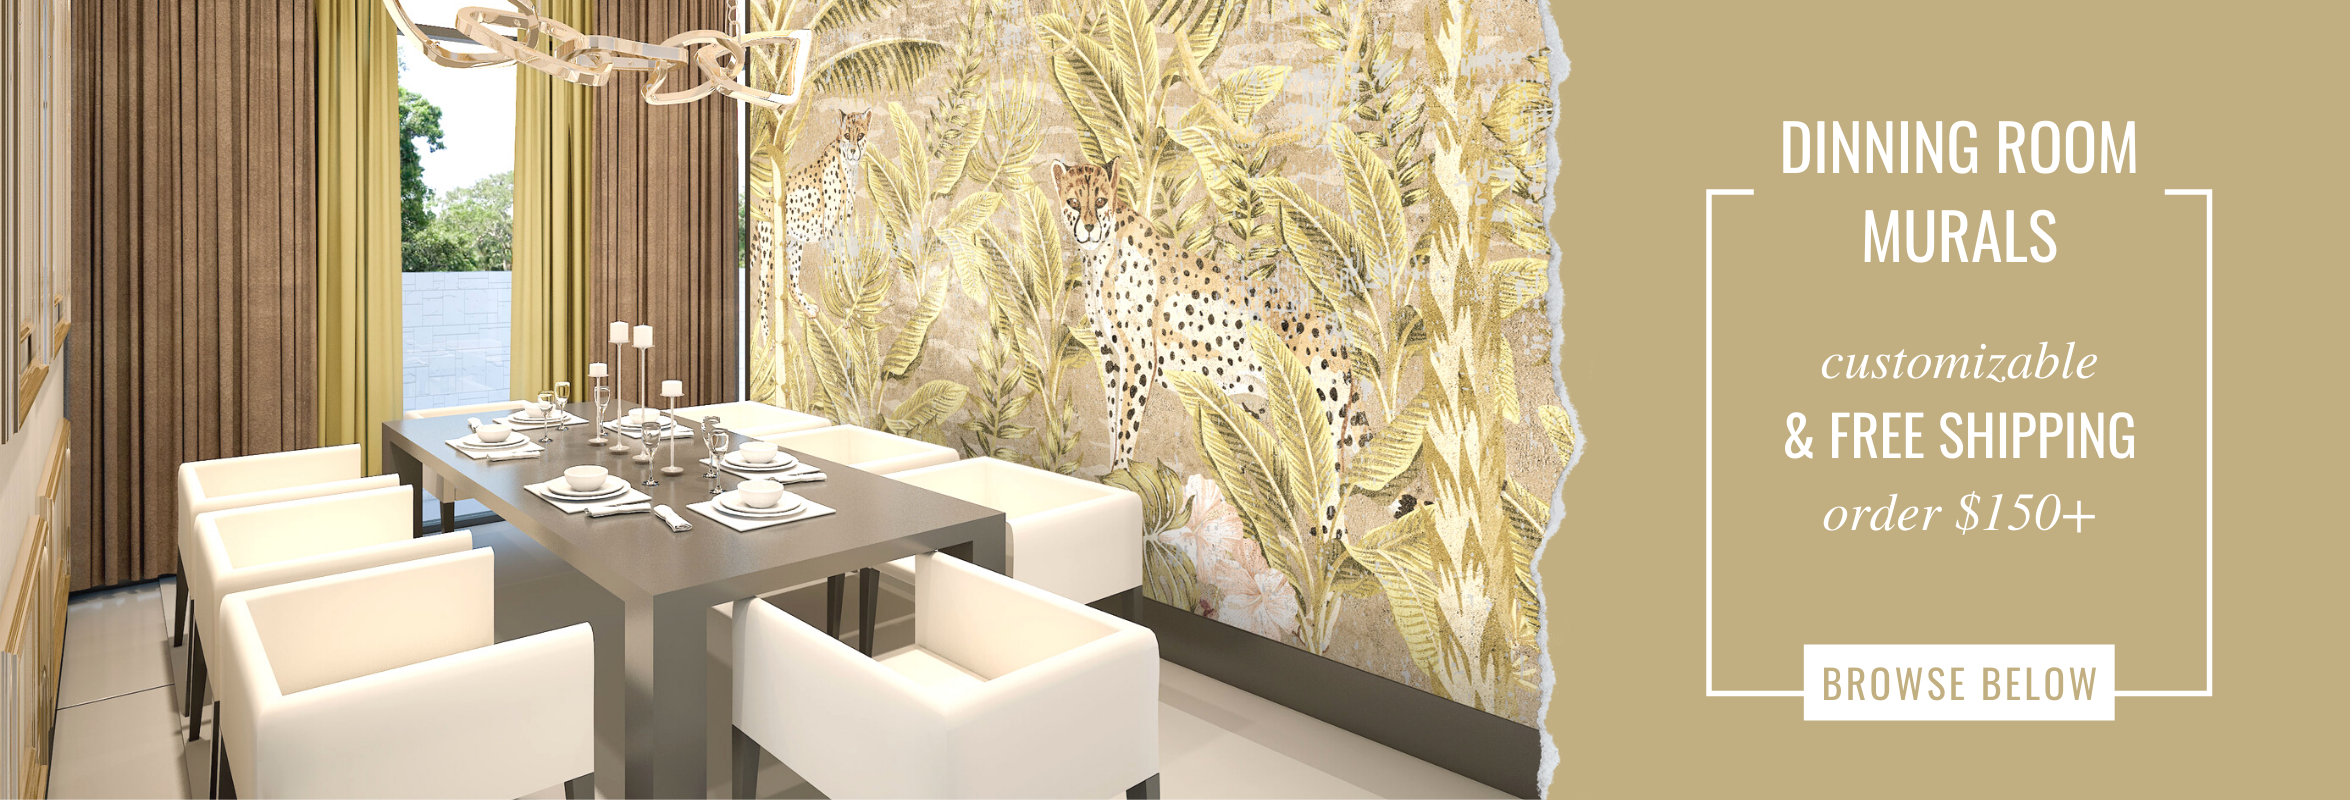 Handpainted Wall Mural Lavender Fields of Southern France  Country  Dining  Room  San Francisco  by Morgan Mural Studios  Houzz IE